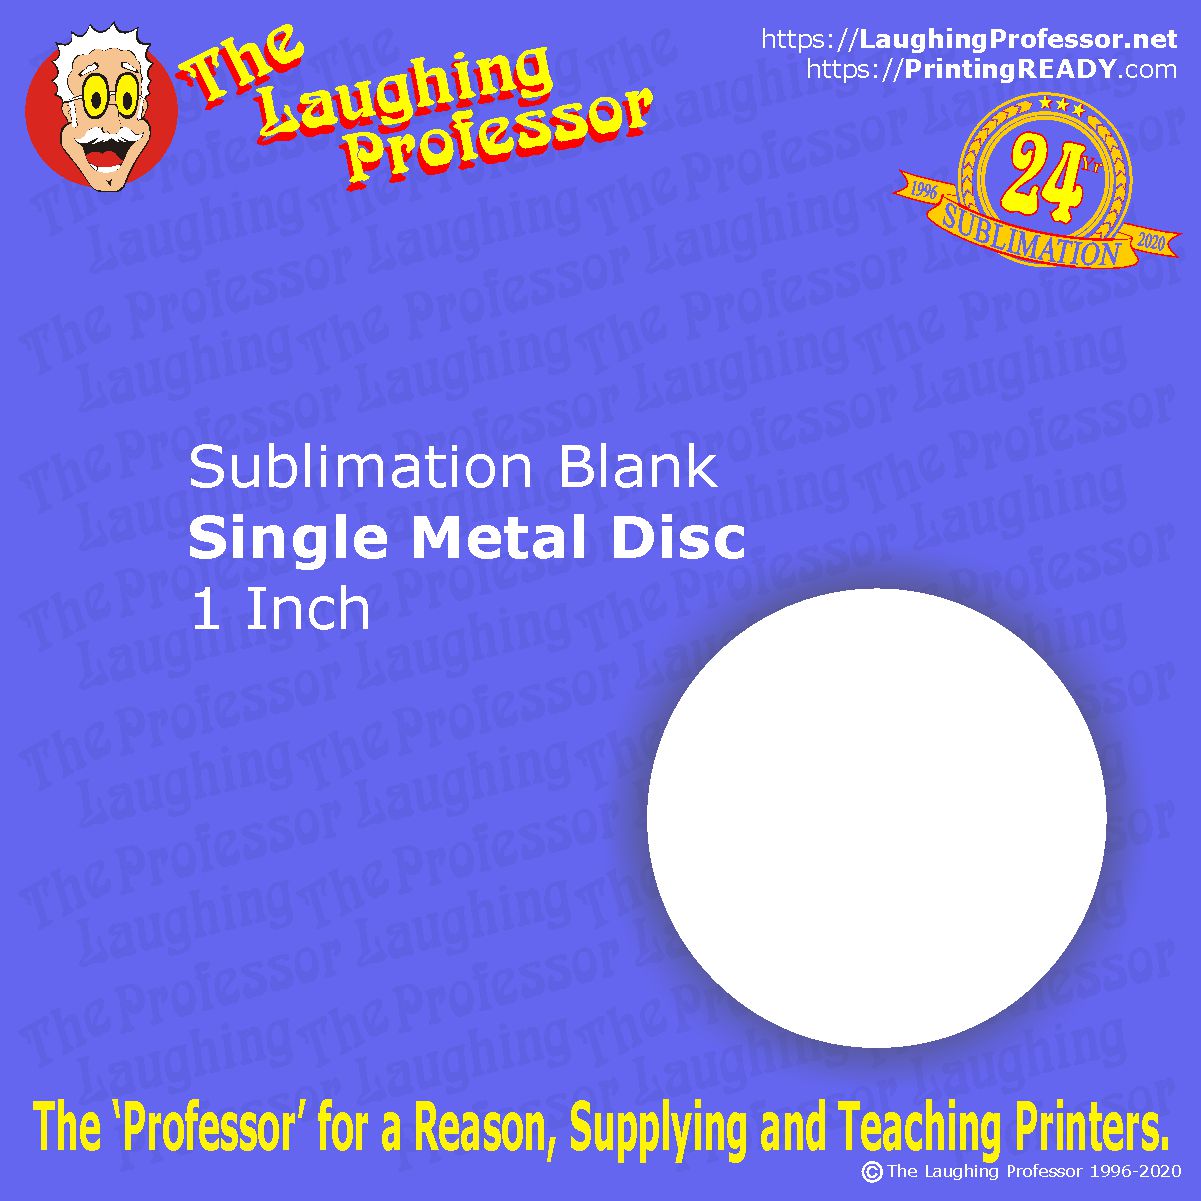  METAL ROUND CIRCLE DISC 1 INCH SUBLIMATION BLANK